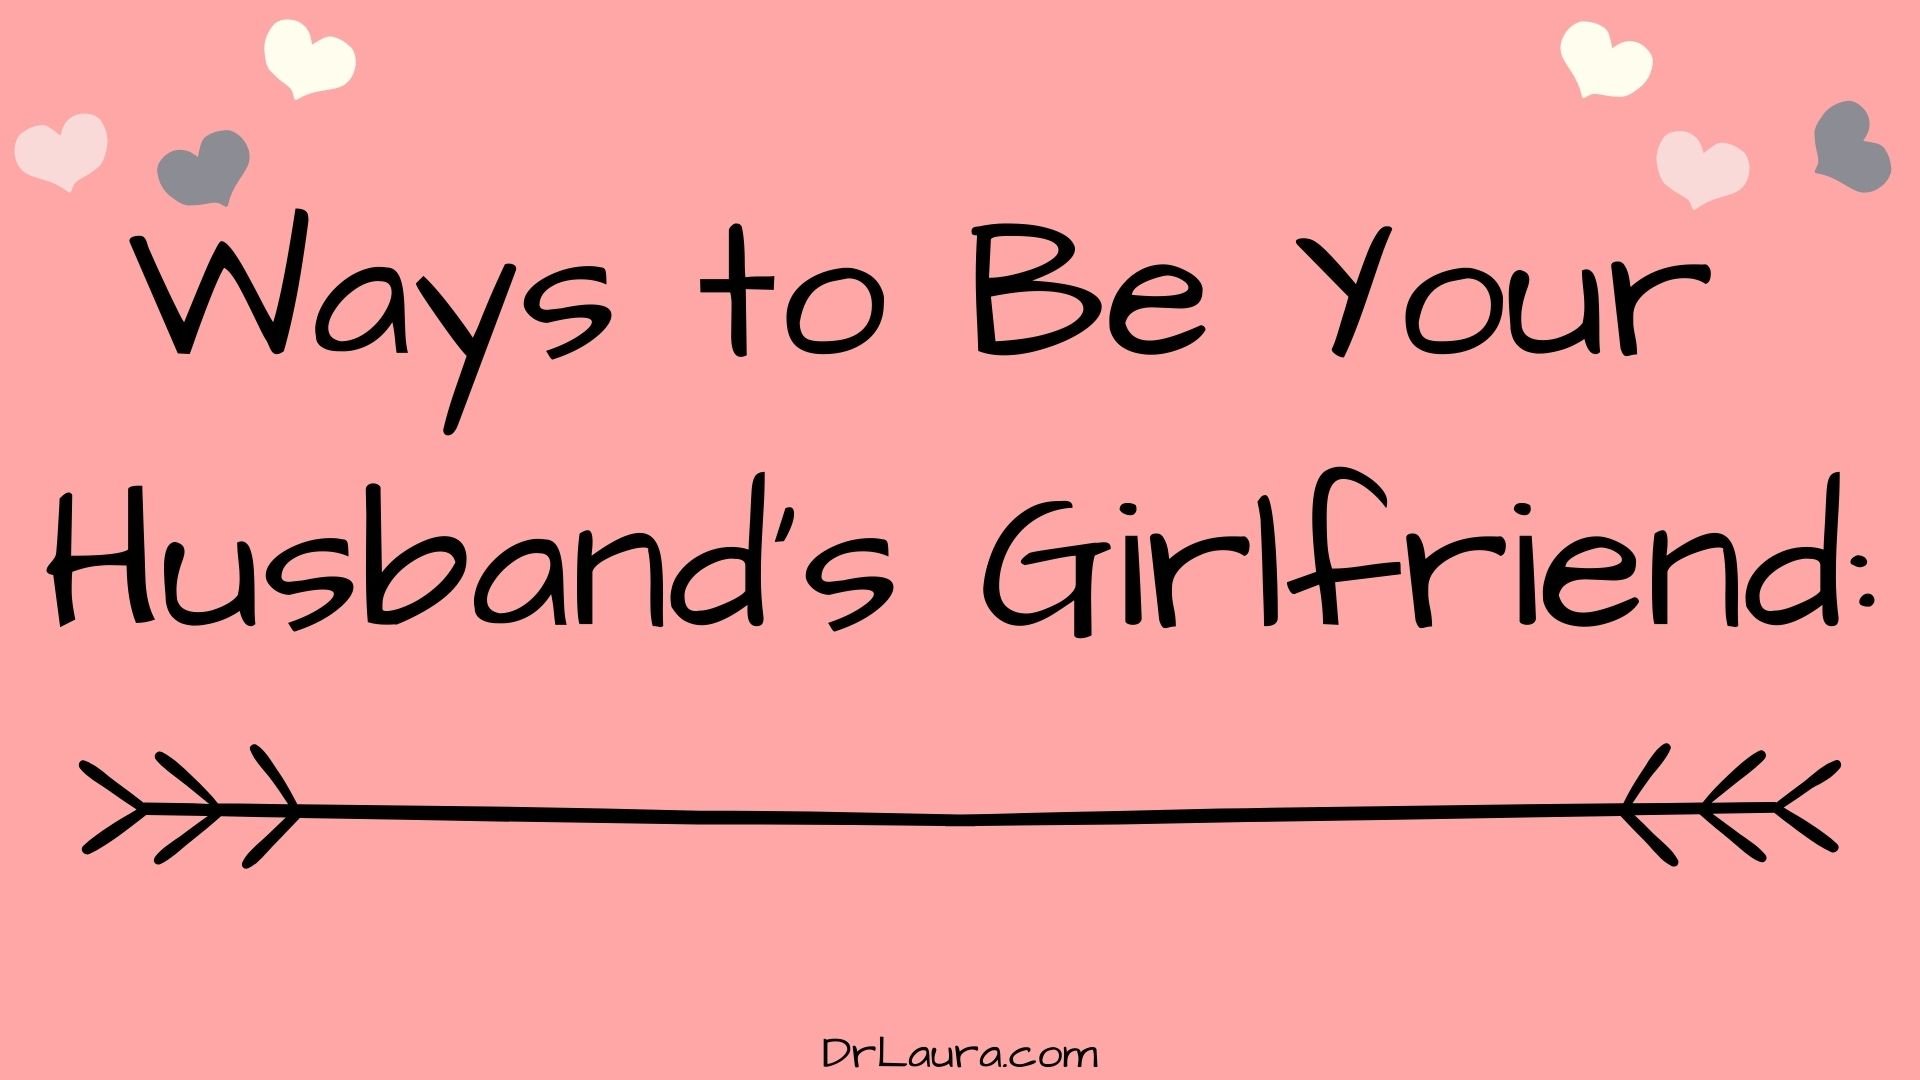 Blog: Ways To Be Your Husband's Girlfriend